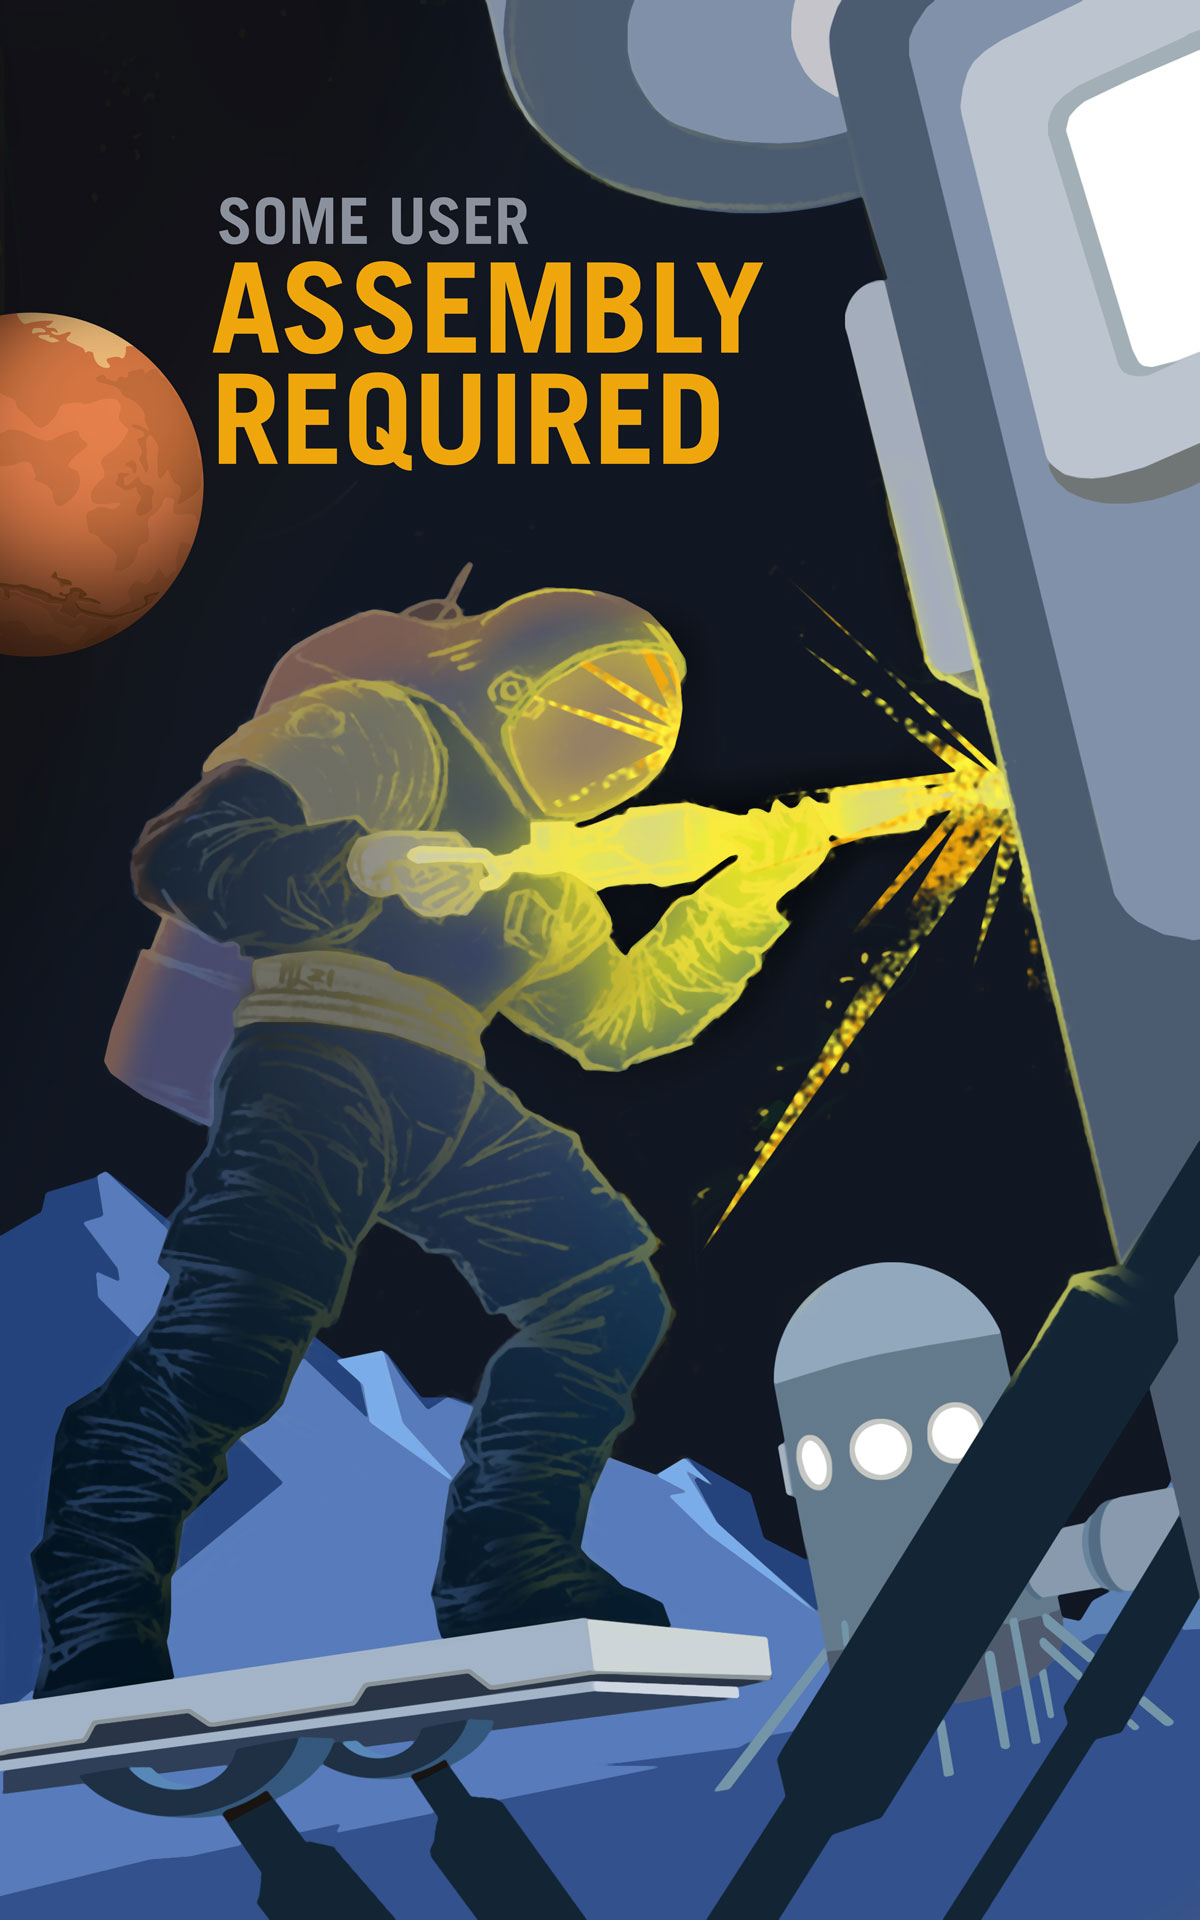 Assembly Required to Build Our Future on Mars and its Moons Poster